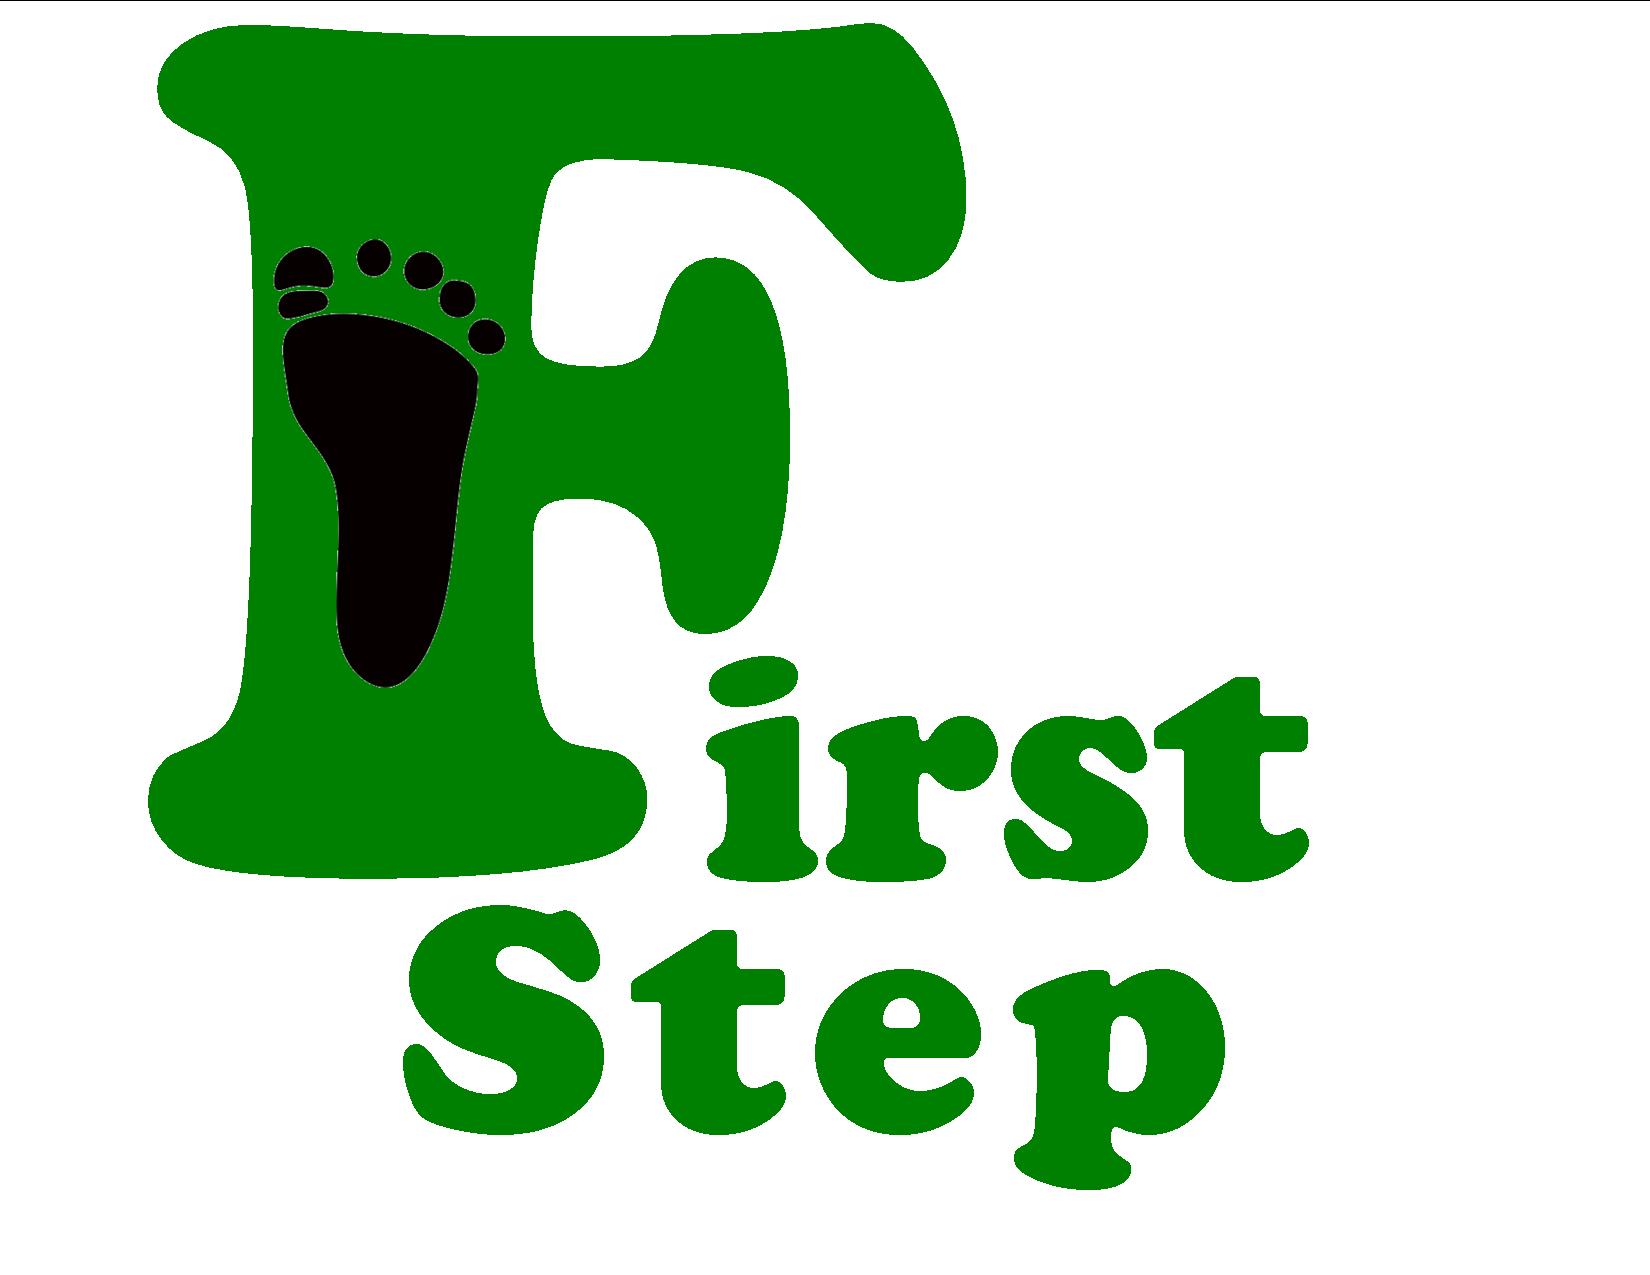 FirstStep